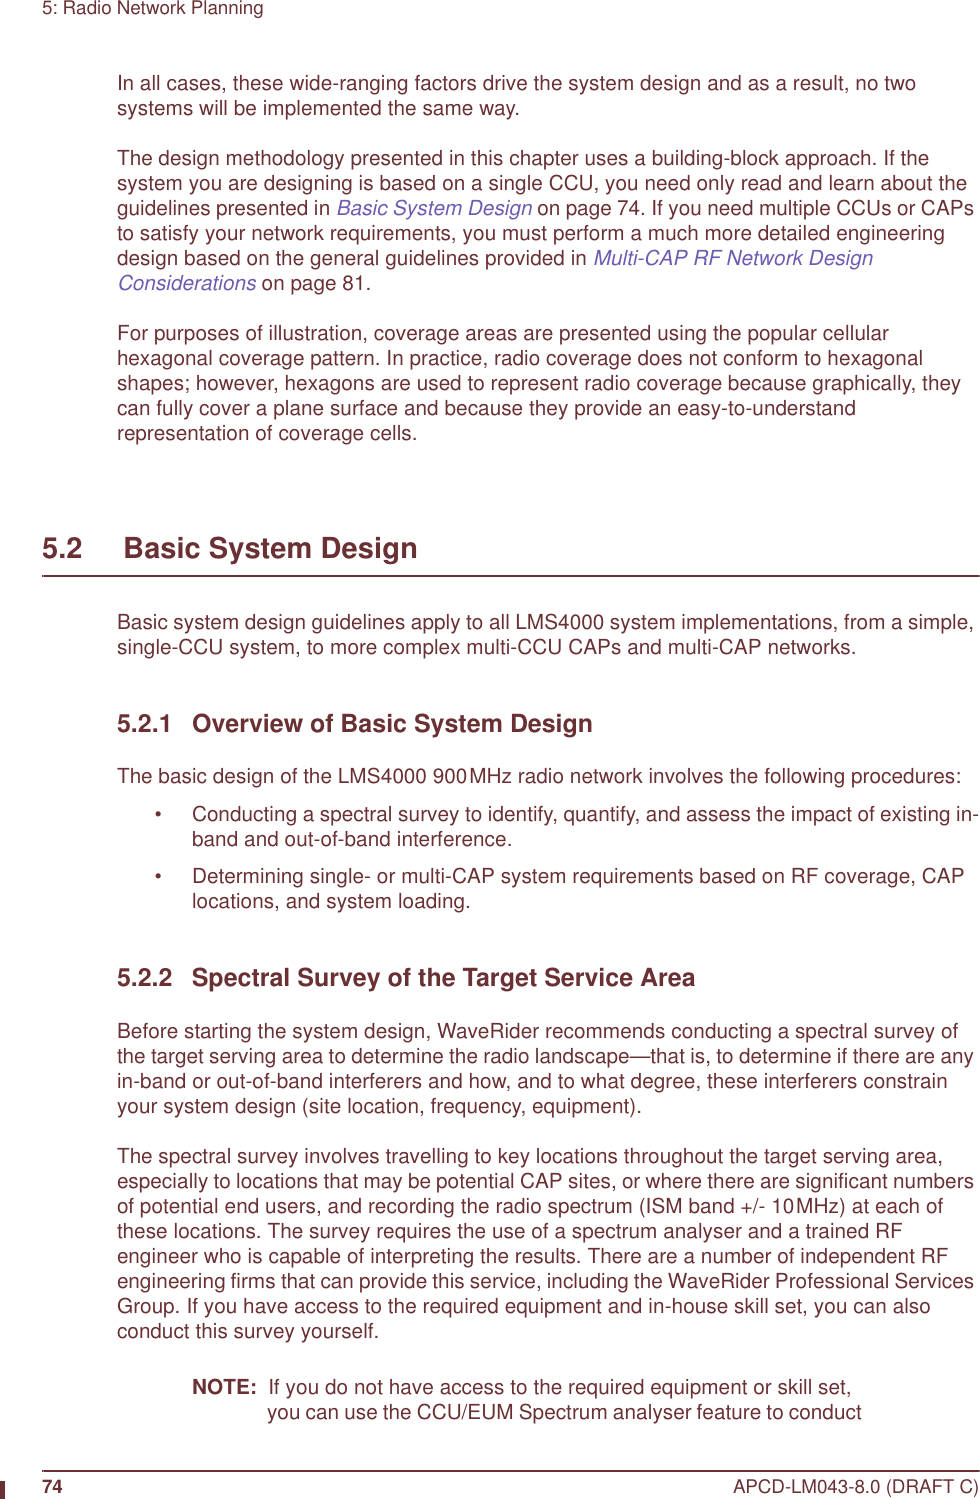 74 APCD-LM043-8.0 (DRAFT C)5: Radio Network PlanningIn all cases, these wide-ranging factors drive the system design and as a result, no two systems will be implemented the same way.The design methodology presented in this chapter uses a building-block approach. If the system you are designing is based on a single CCU, you need only read and learn about the guidelines presented in Basic System Design on page 74. If you need multiple CCUs or CAPs to satisfy your network requirements, you must perform a much more detailed engineering design based on the general guidelines provided in Multi-CAP RF Network Design Considerations on page 81.For purposes of illustration, coverage areas are presented using the popular cellular hexagonal coverage pattern. In practice, radio coverage does not conform to hexagonal shapes; however, hexagons are used to represent radio coverage because graphically, they can fully cover a plane surface and because they provide an easy-to-understand representation of coverage cells.5.2     Basic System DesignBasic system design guidelines apply to all LMS4000 system implementations, from a simple, single-CCU system, to more complex multi-CCU CAPs and multi-CAP networks.5.2.1 Overview of Basic System DesignThe basic design of the LMS4000 900MHz radio network involves the following procedures:• Conducting a spectral survey to identify, quantify, and assess the impact of existing in-band and out-of-band interference.• Determining single- or multi-CAP system requirements based on RF coverage, CAP locations, and system loading.5.2.2 Spectral Survey of the Target Service AreaBefore starting the system design, WaveRider recommends conducting a spectral survey of the target serving area to determine the radio landscape—that is, to determine if there are any in-band or out-of-band interferers and how, and to what degree, these interferers constrain your system design (site location, frequency, equipment).The spectral survey involves travelling to key locations throughout the target serving area, especially to locations that may be potential CAP sites, or where there are significant numbers of potential end users, and recording the radio spectrum (ISM band +/- 10MHz) at each of these locations. The survey requires the use of a spectrum analyser and a trained RF engineer who is capable of interpreting the results. There are a number of independent RF engineering firms that can provide this service, including the WaveRider Professional Services Group. If you have access to the required equipment and in-house skill set, you can also conduct this survey yourself.NOTE:  If you do not have access to the required equipment or skill set, you can use the CCU/EUM Spectrum analyser feature to conduct 